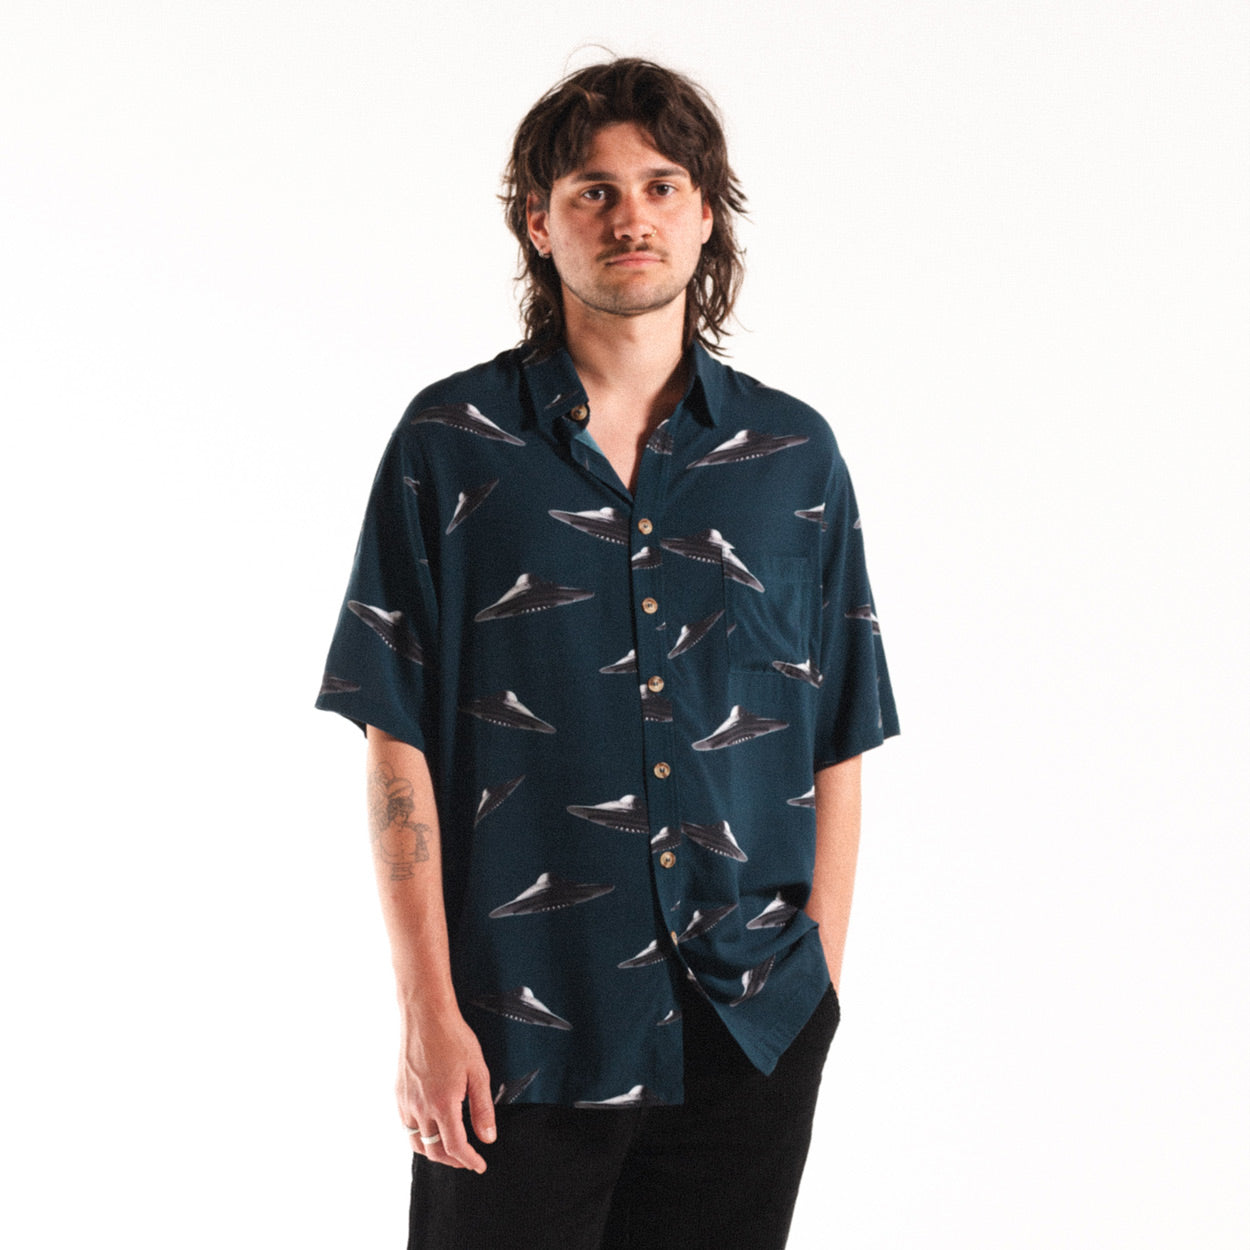 Come in Peace Rayon Shirt